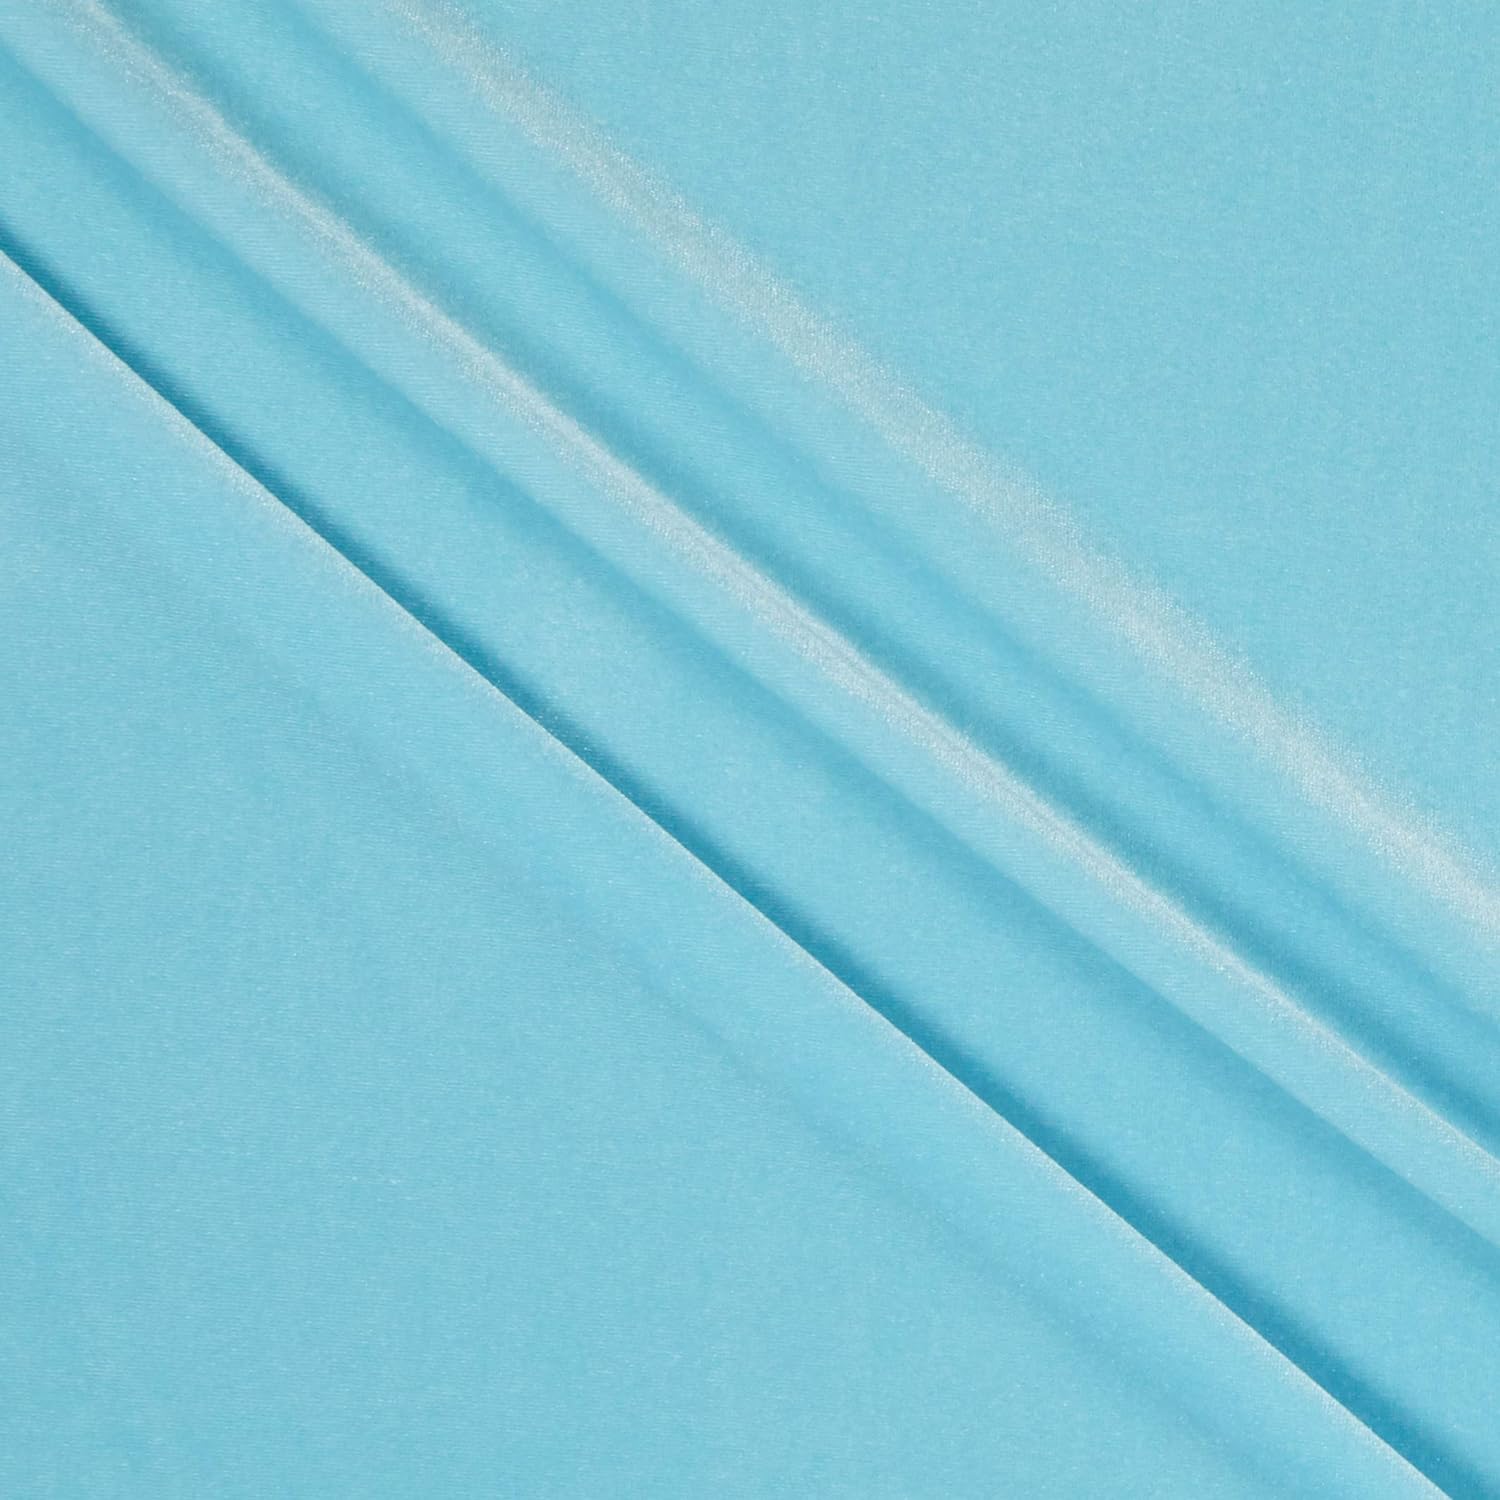 60" Baby Blue Power Mesh Fabric 80% Poly 20% Spandex By The Yard